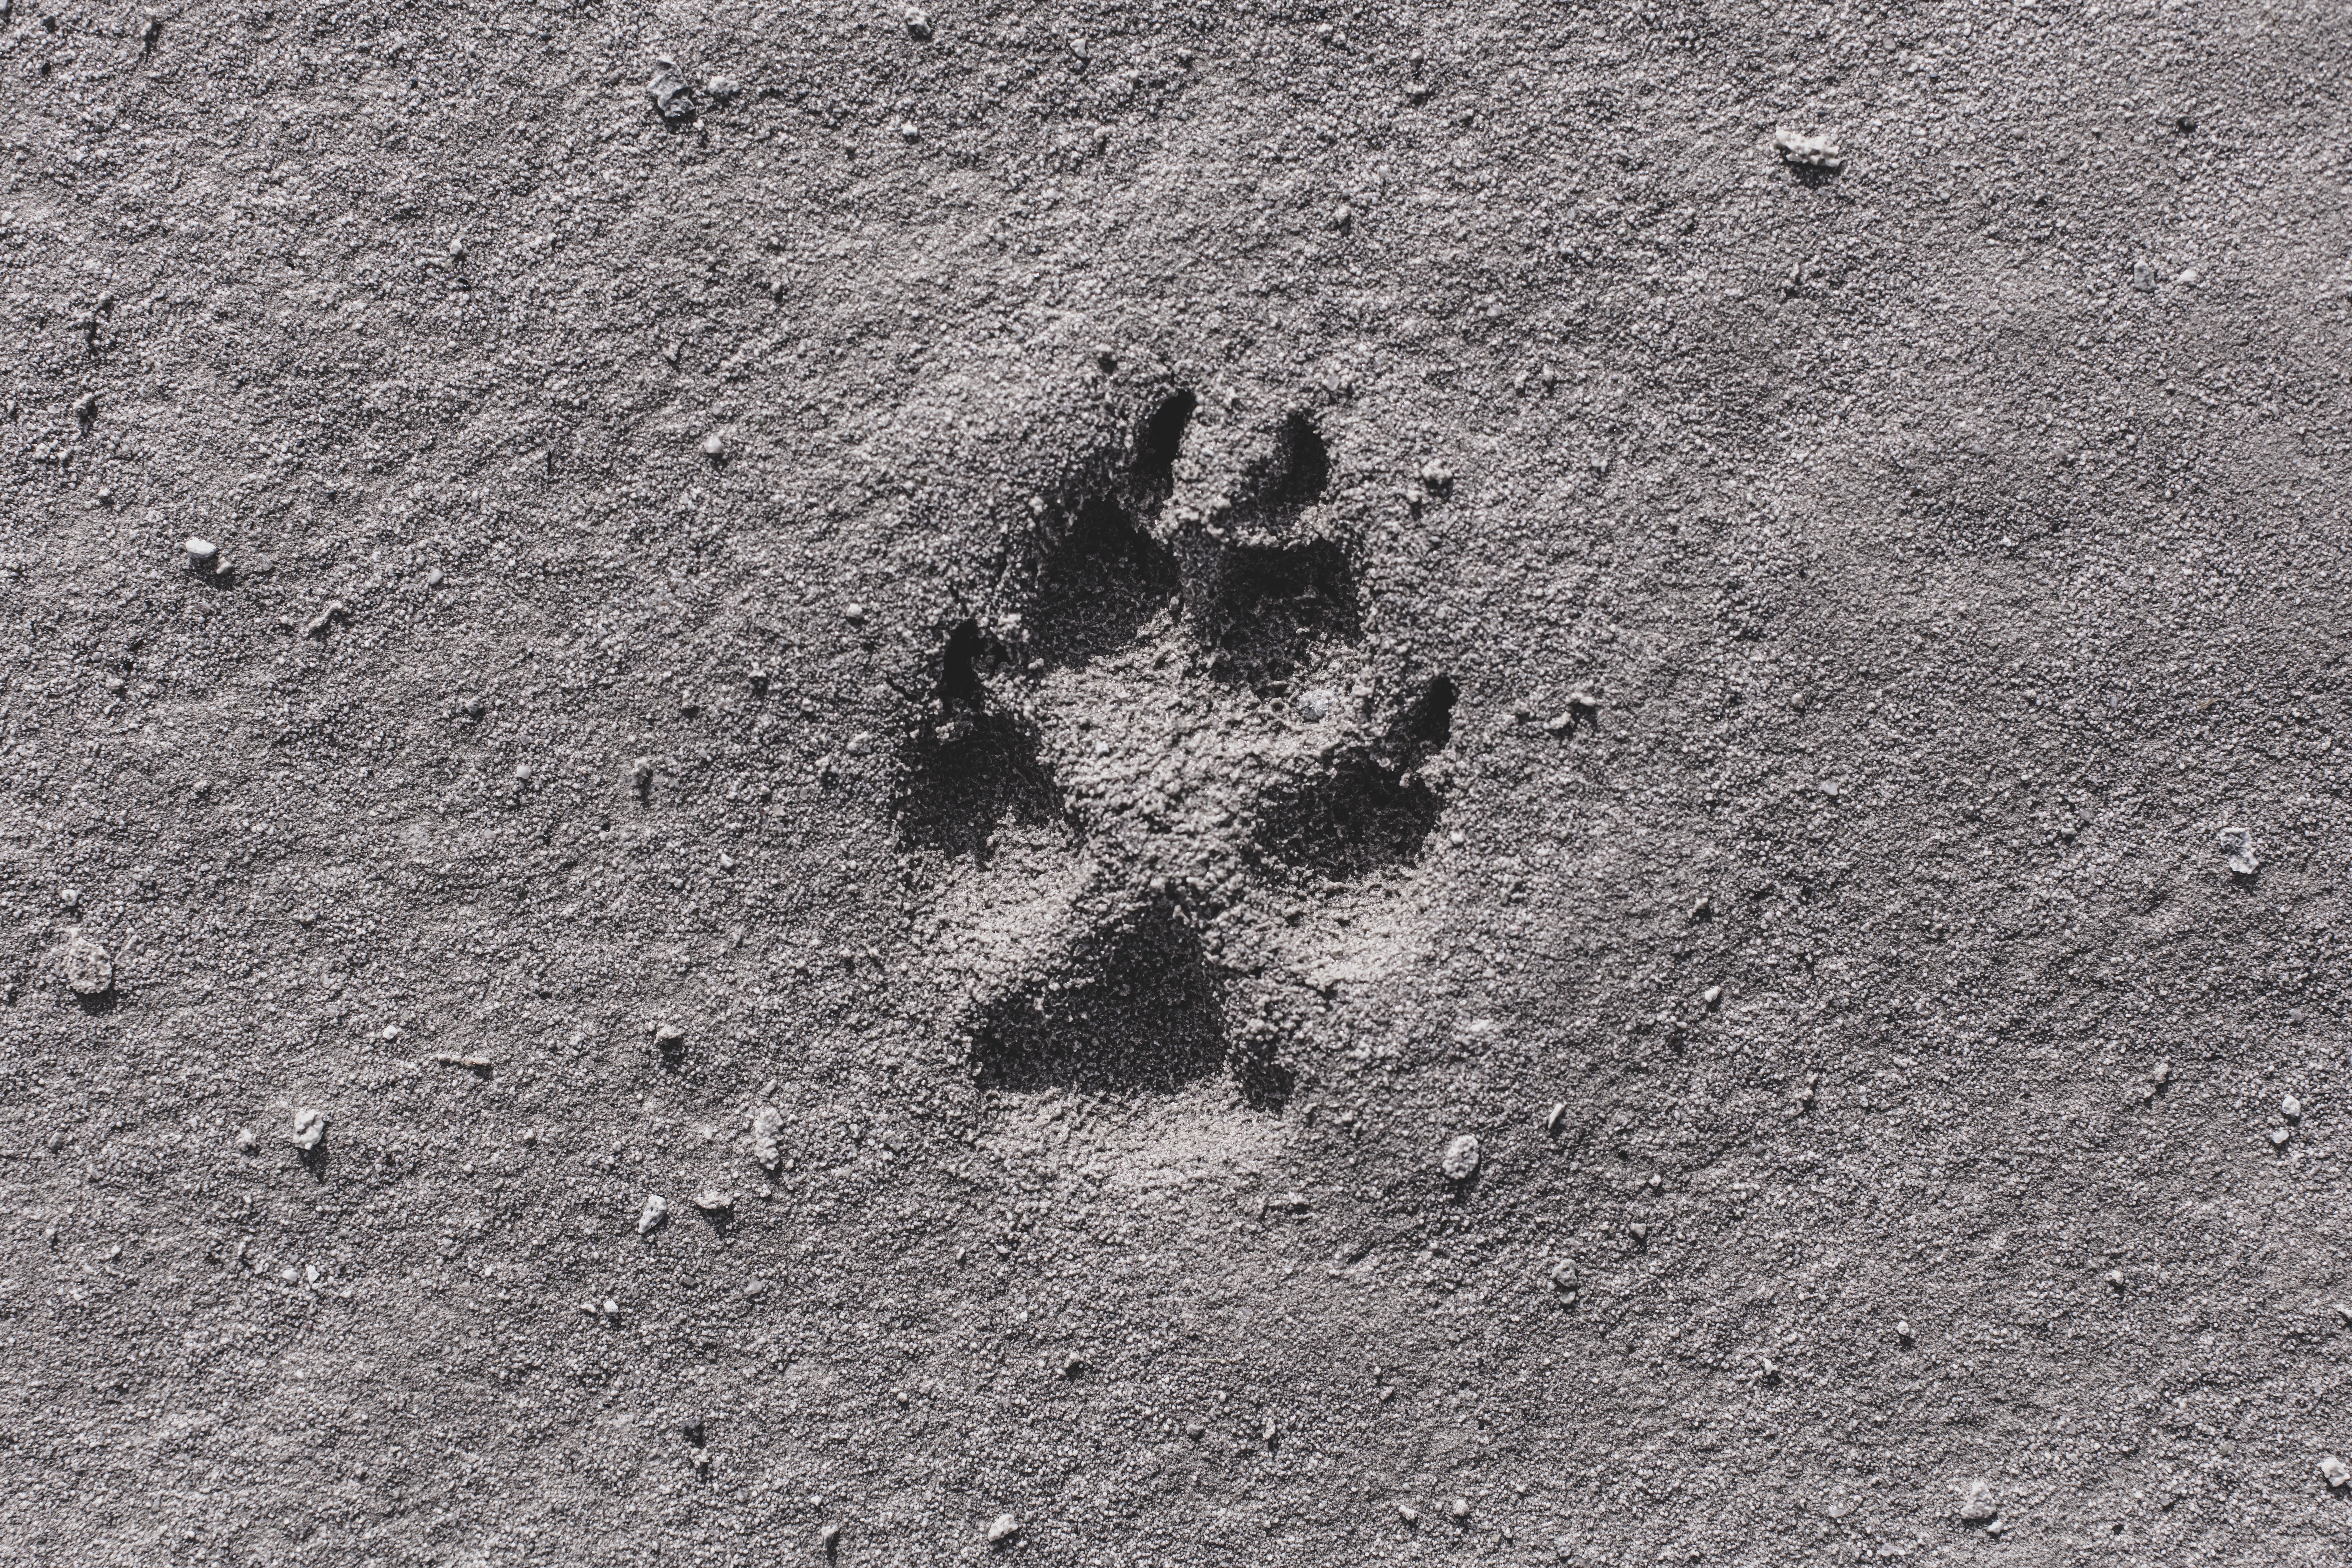 sand, miscellanea, miscellaneous, close up, bw, chb, track, trace, paw